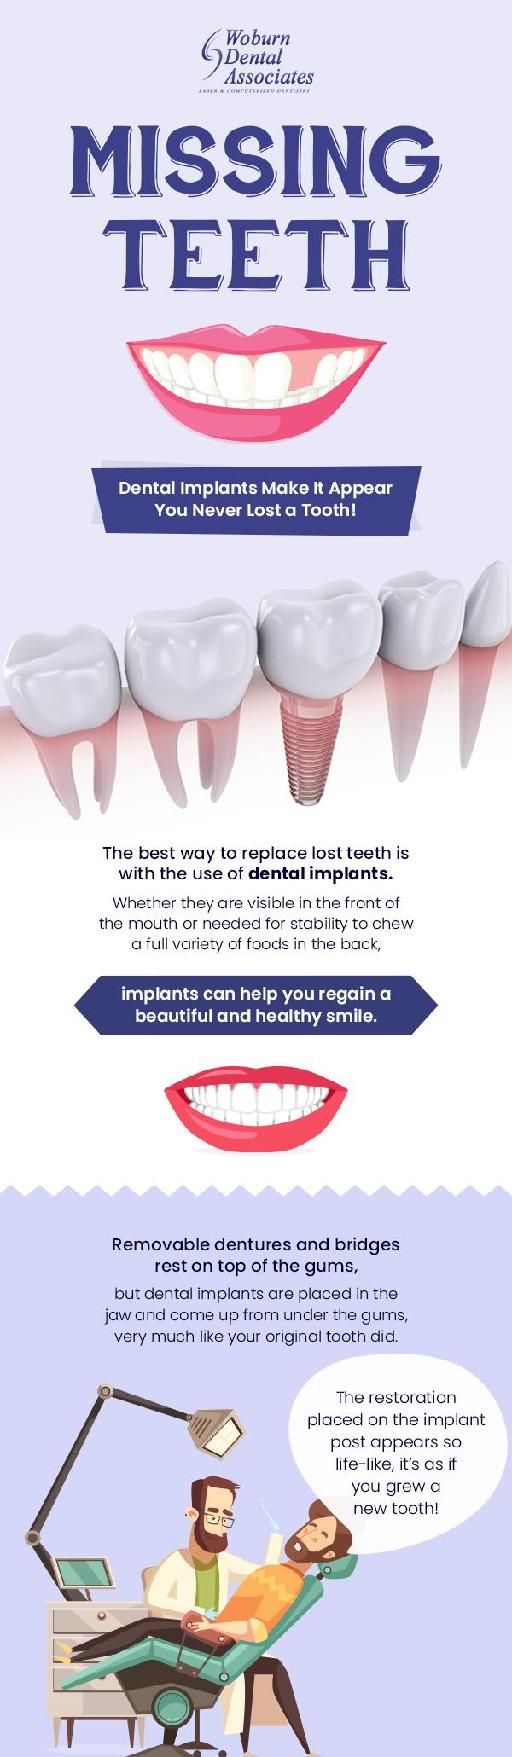 Replace Lost Teeth with Implant from Woburn Dental Associates